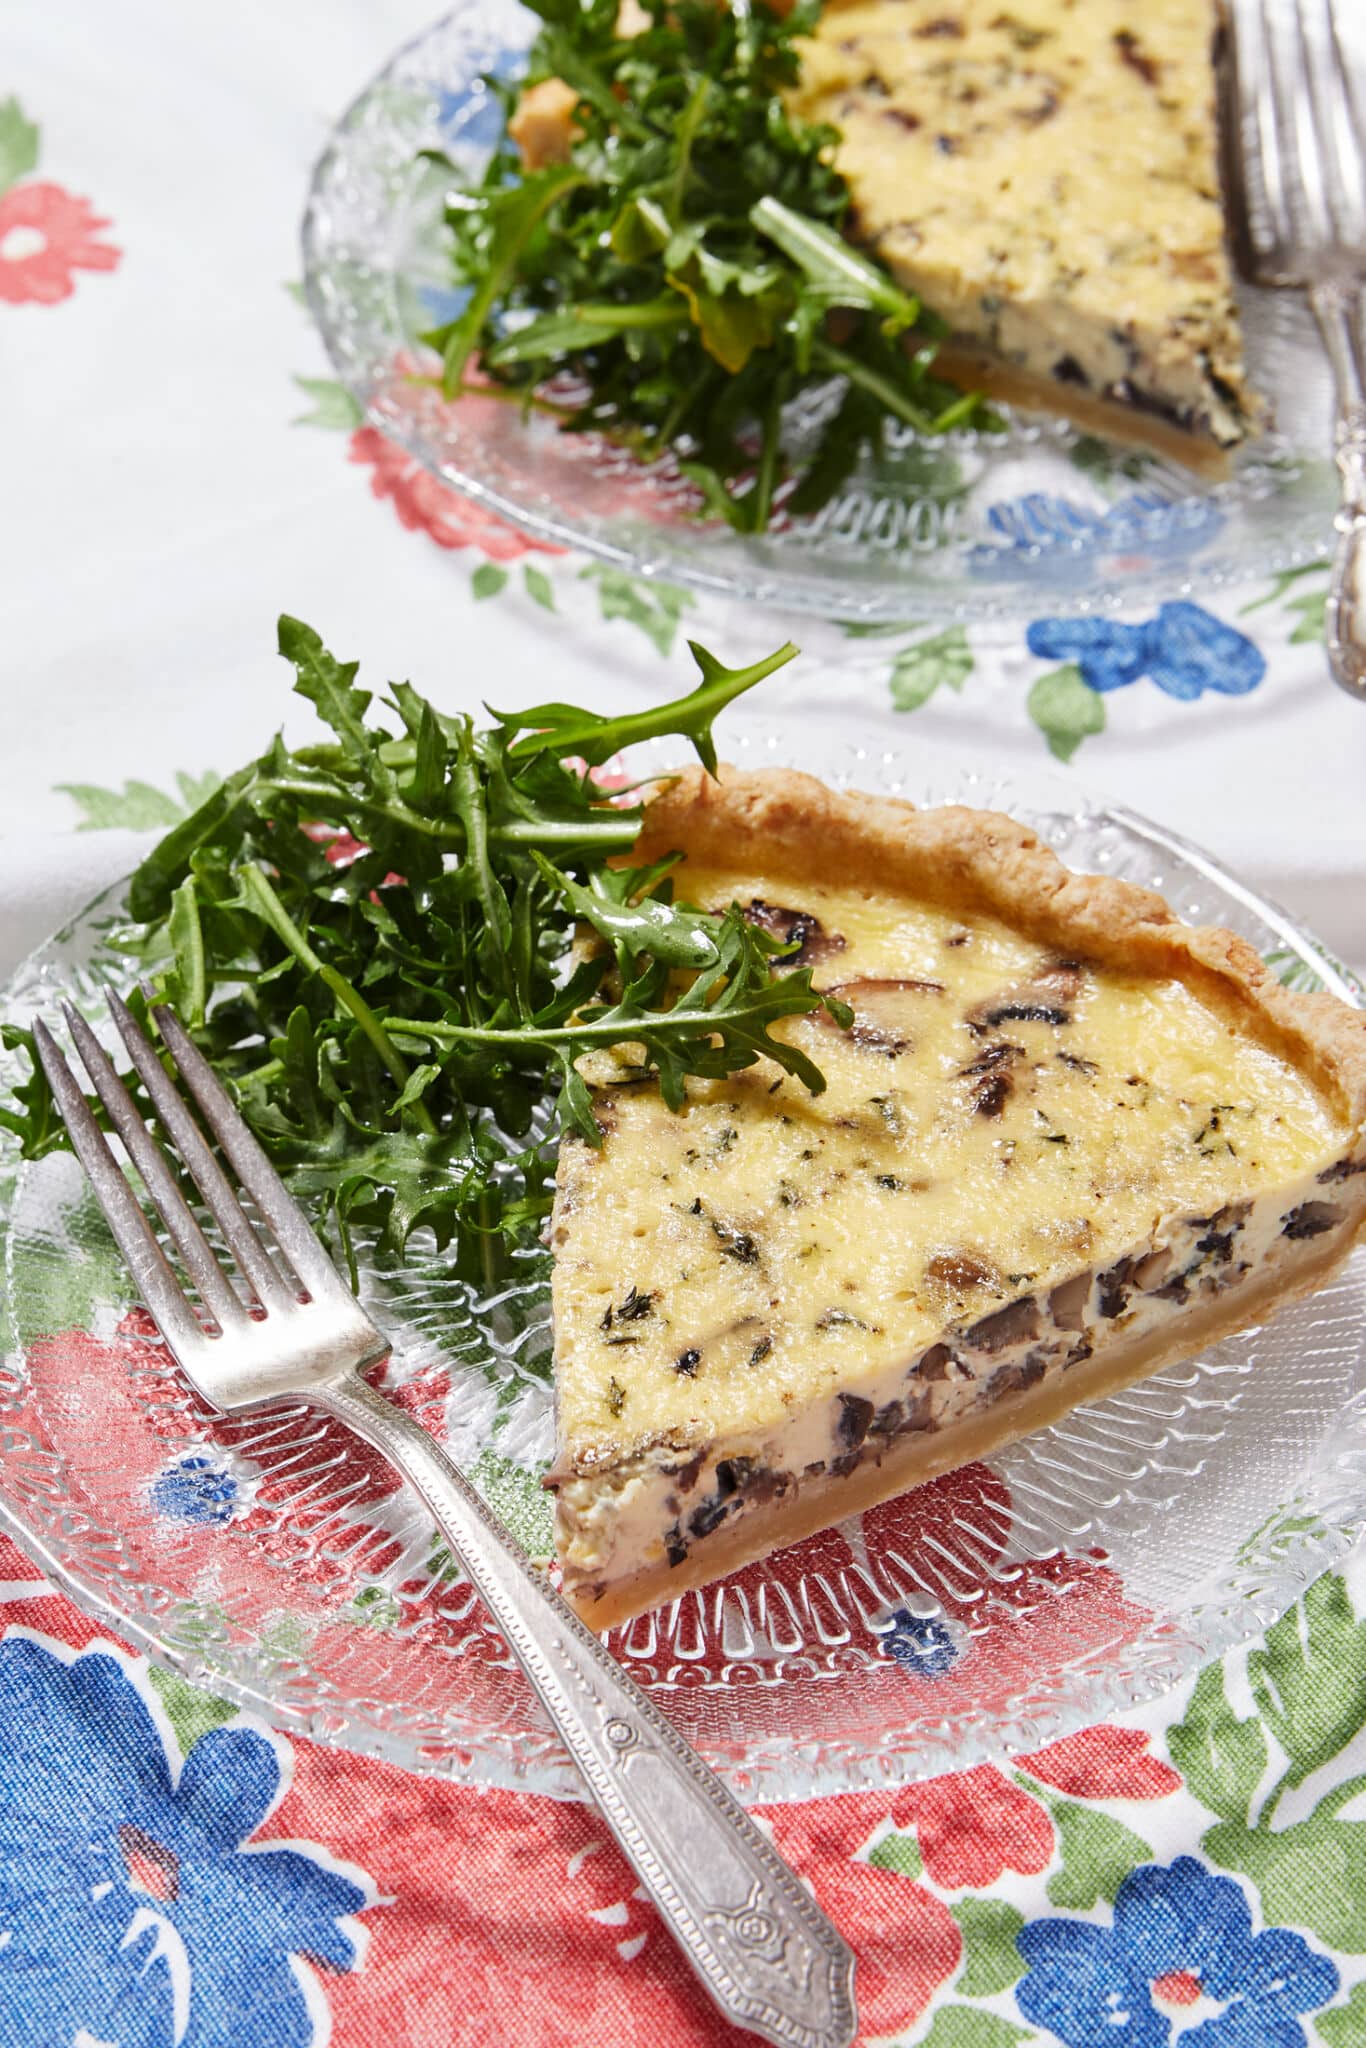 Two slices of Mushroom and Thyme Leaf Tart are served on clear glass plates with forks. The tart has golden, buttery and crumbly crust loaded with velvety custard filling and mushrooms, paired with green earthy thyme leaves.